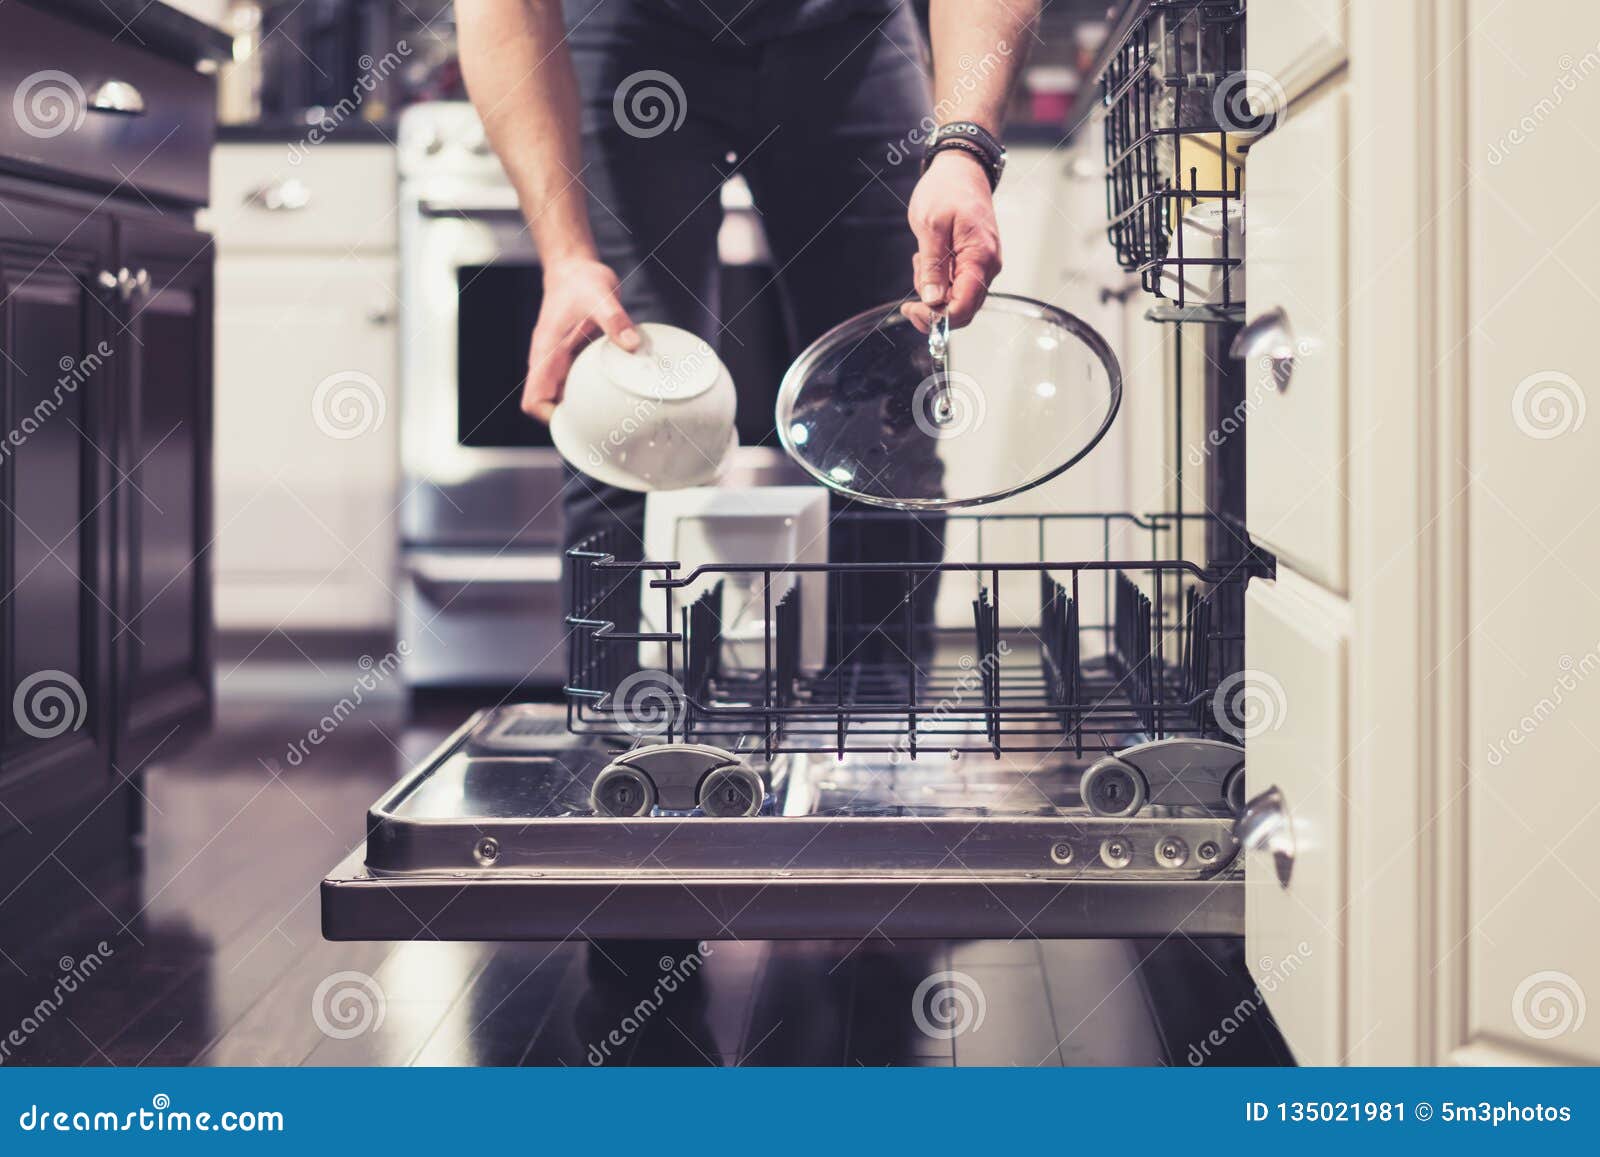 man doing dishes cleaning in the kitchen household chores